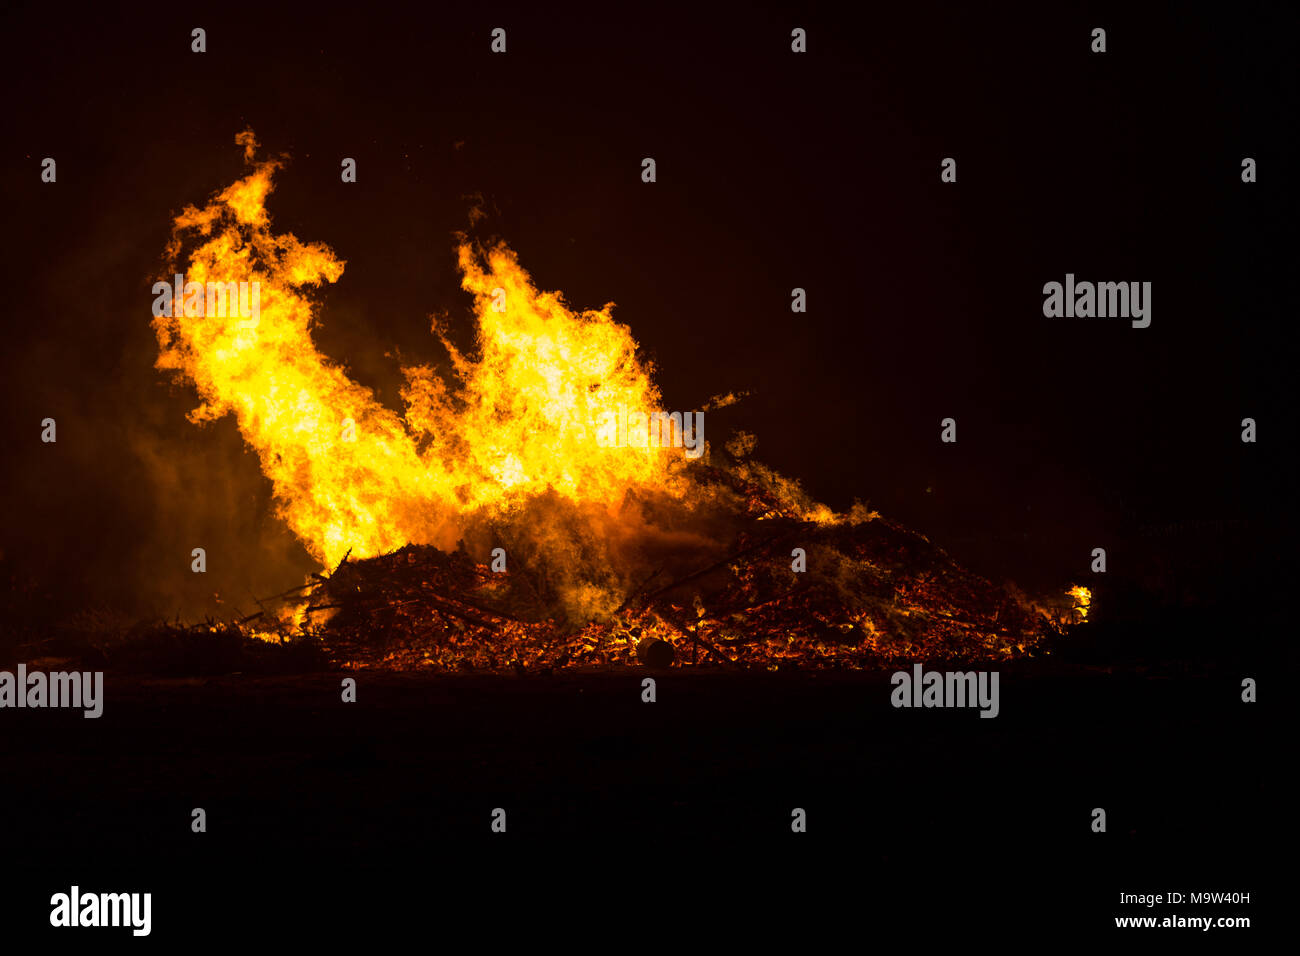 Dangerous high flames from the bonfire in Floradorp Amsterdam North in the Netherlands. Stock Photo